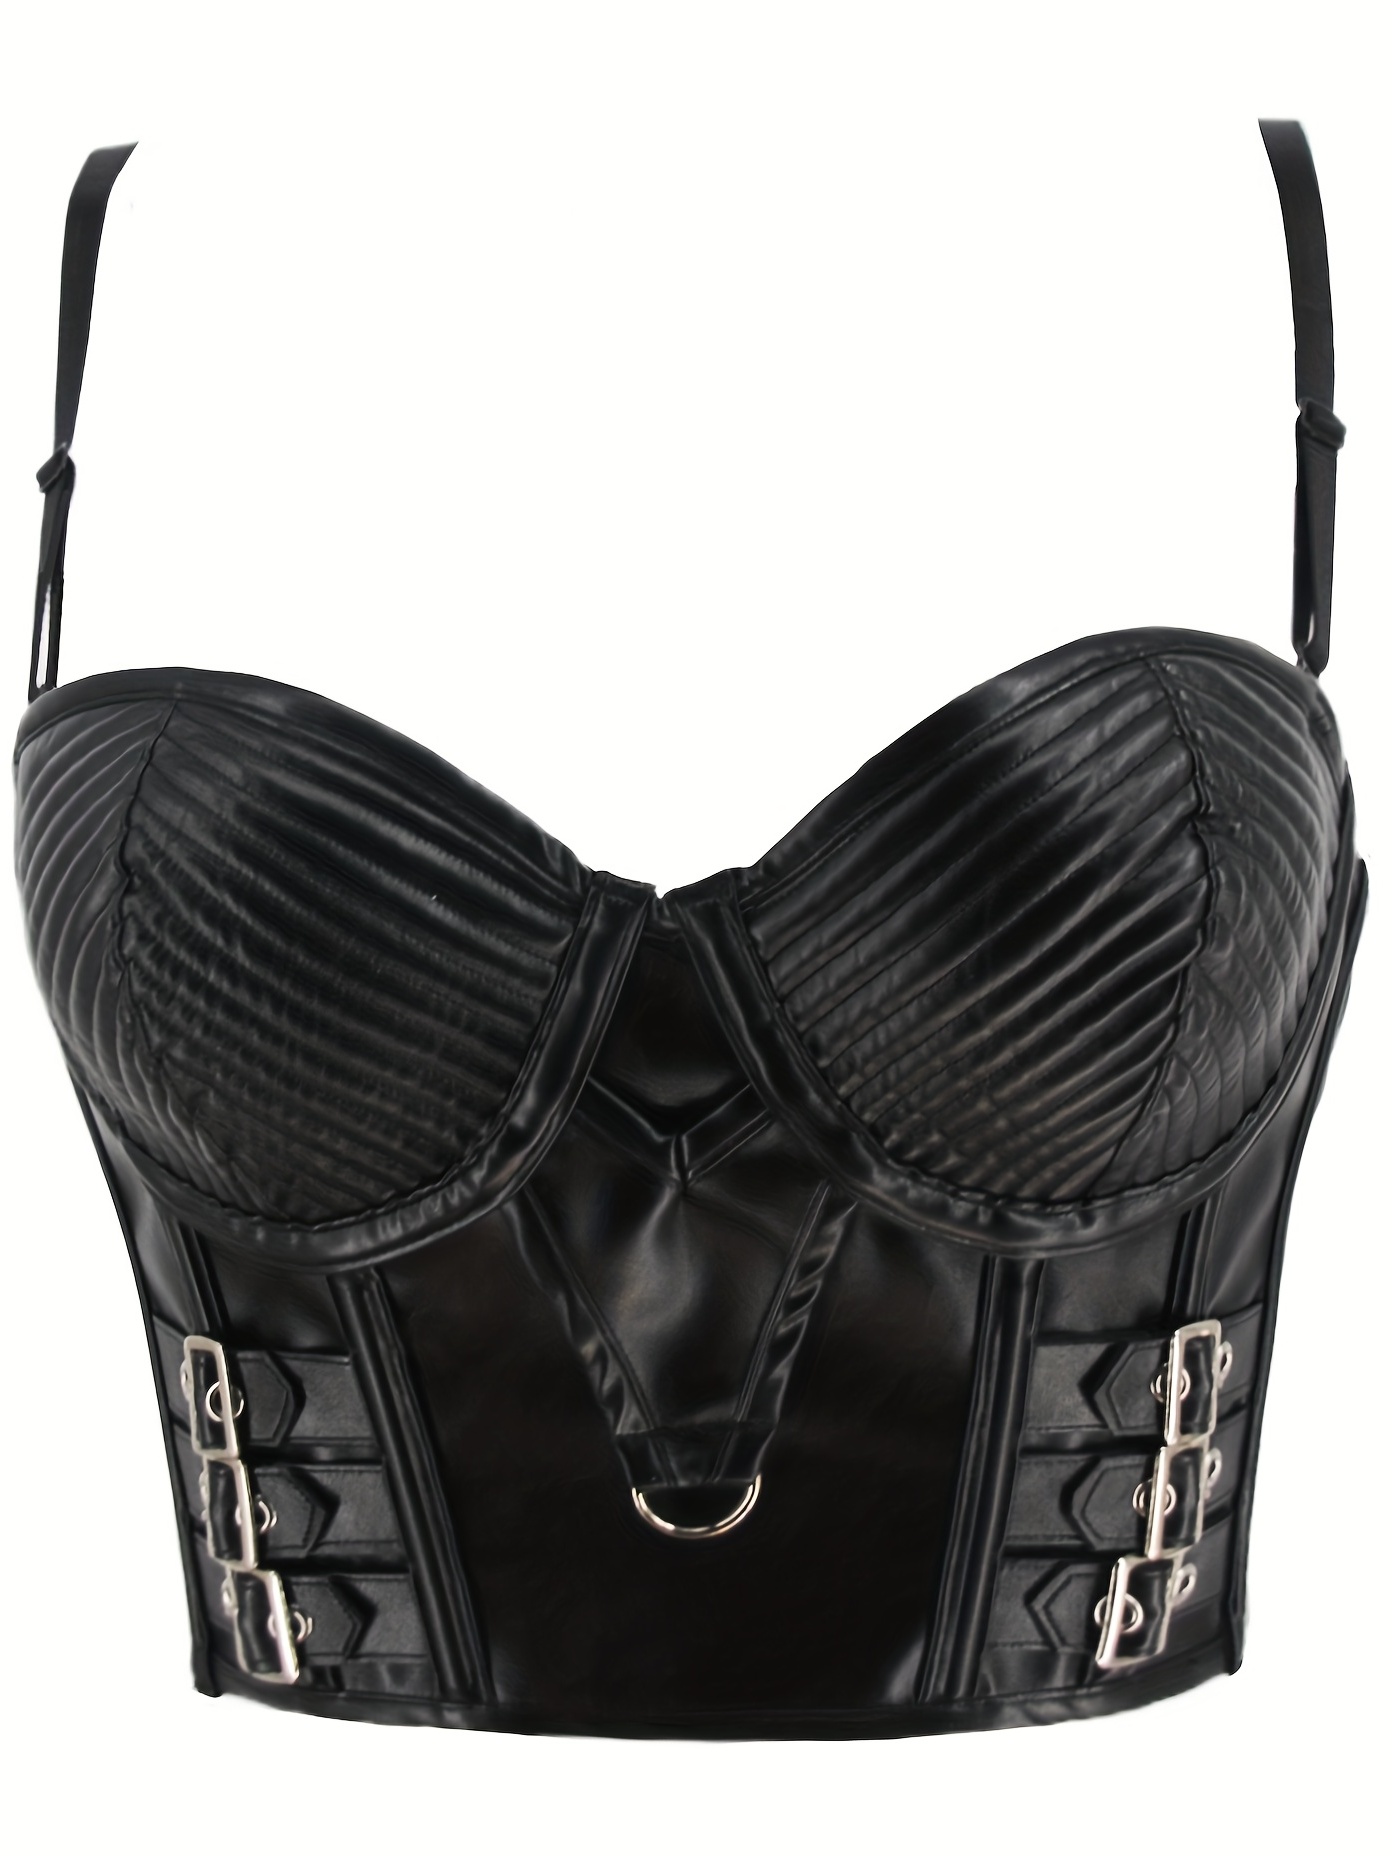 MISS MOLY Womens PU Leather Bustier Crop Top Gothic Punk Push Up Women's  Corset Top Bra 